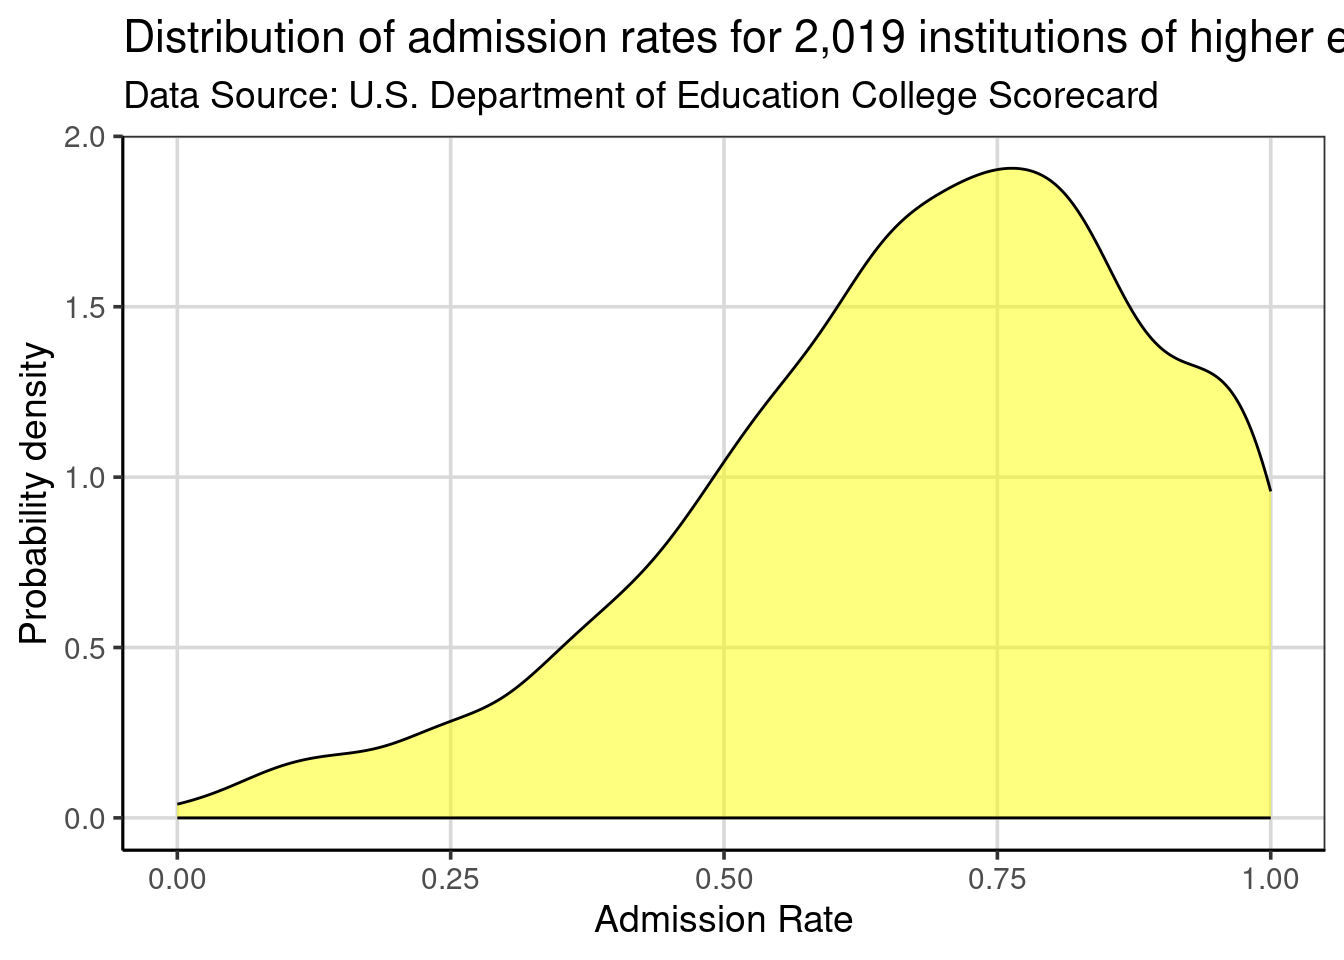 Density curve showing the distribution of admission rates for institutions of higher education.